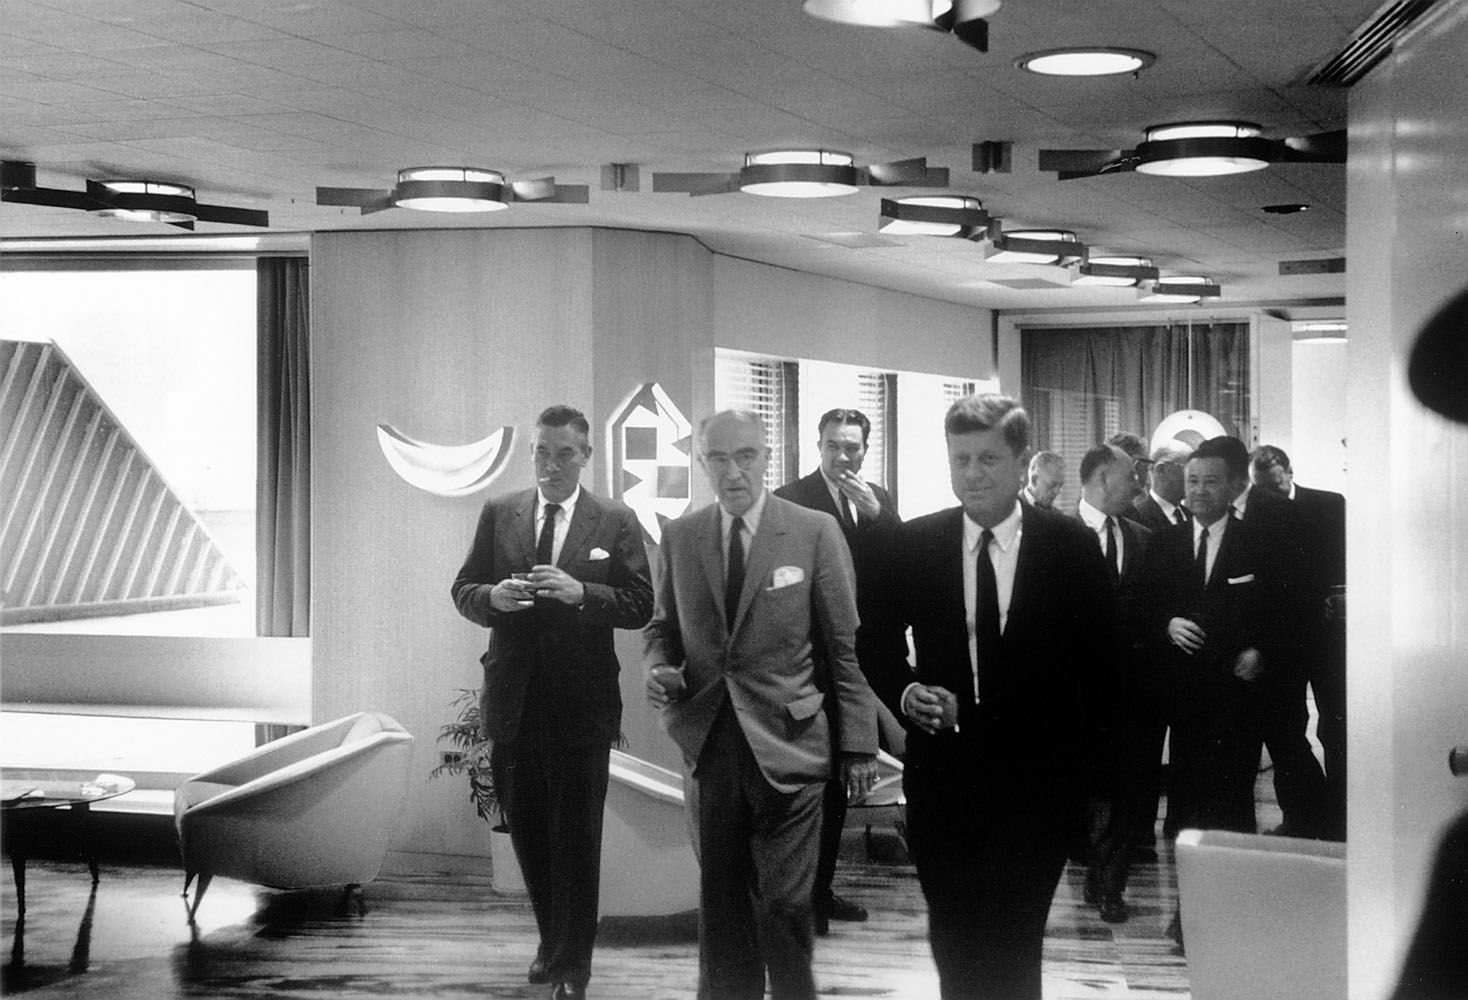 Yep, bumping shoulders with soon-to-be presidents ("Oh, hey there, JFK!") roaming the halls of the building. Just another day at work.